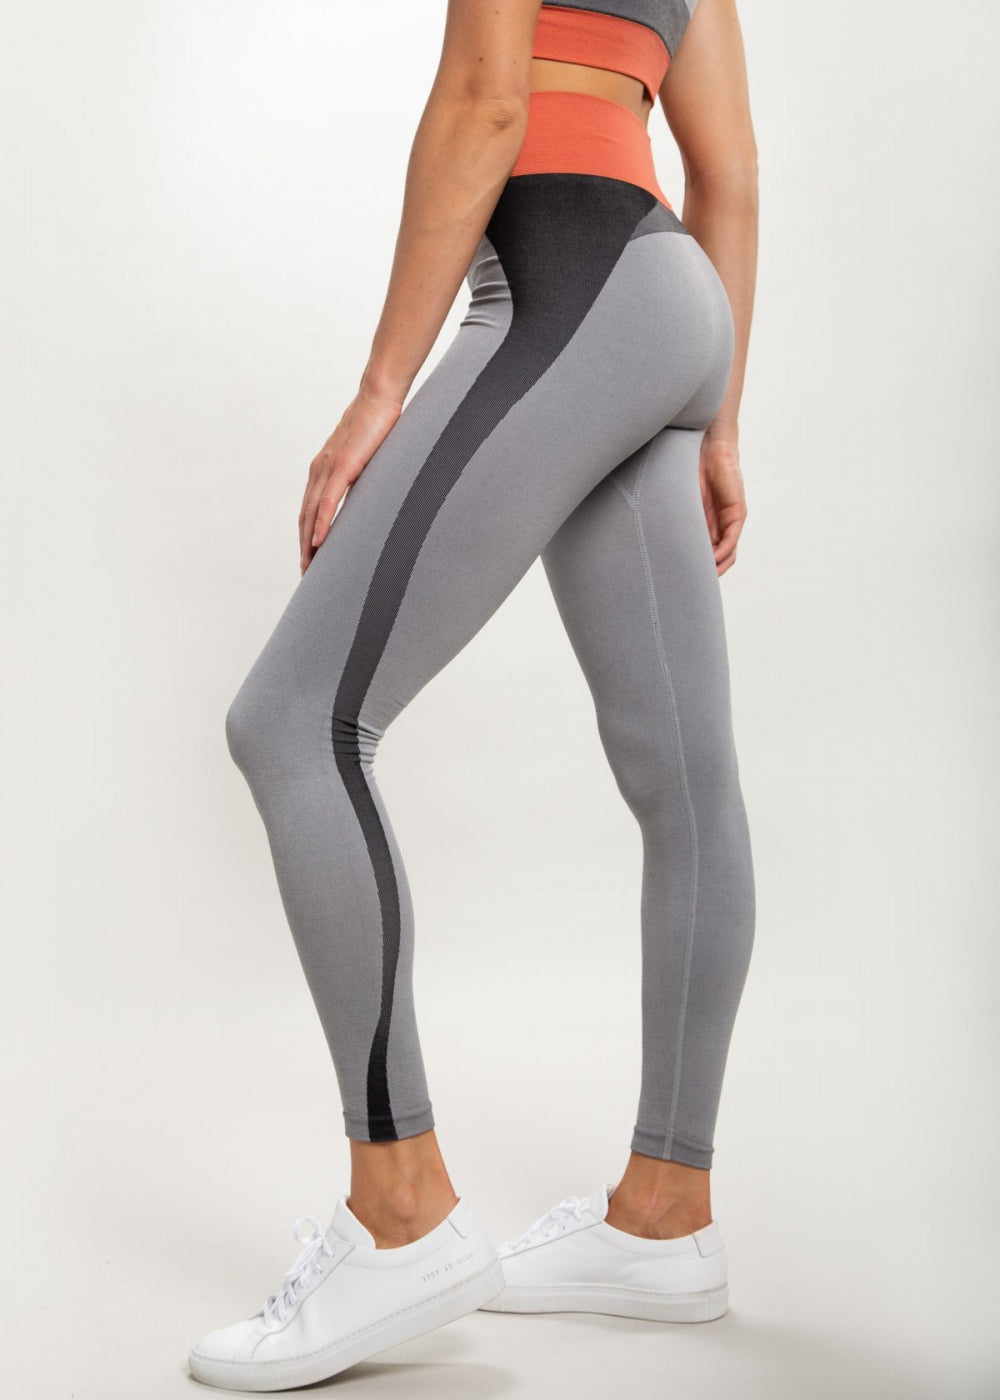 Barre Class Bombshell High Waist Legging In Grey • Impressions Online  Boutique